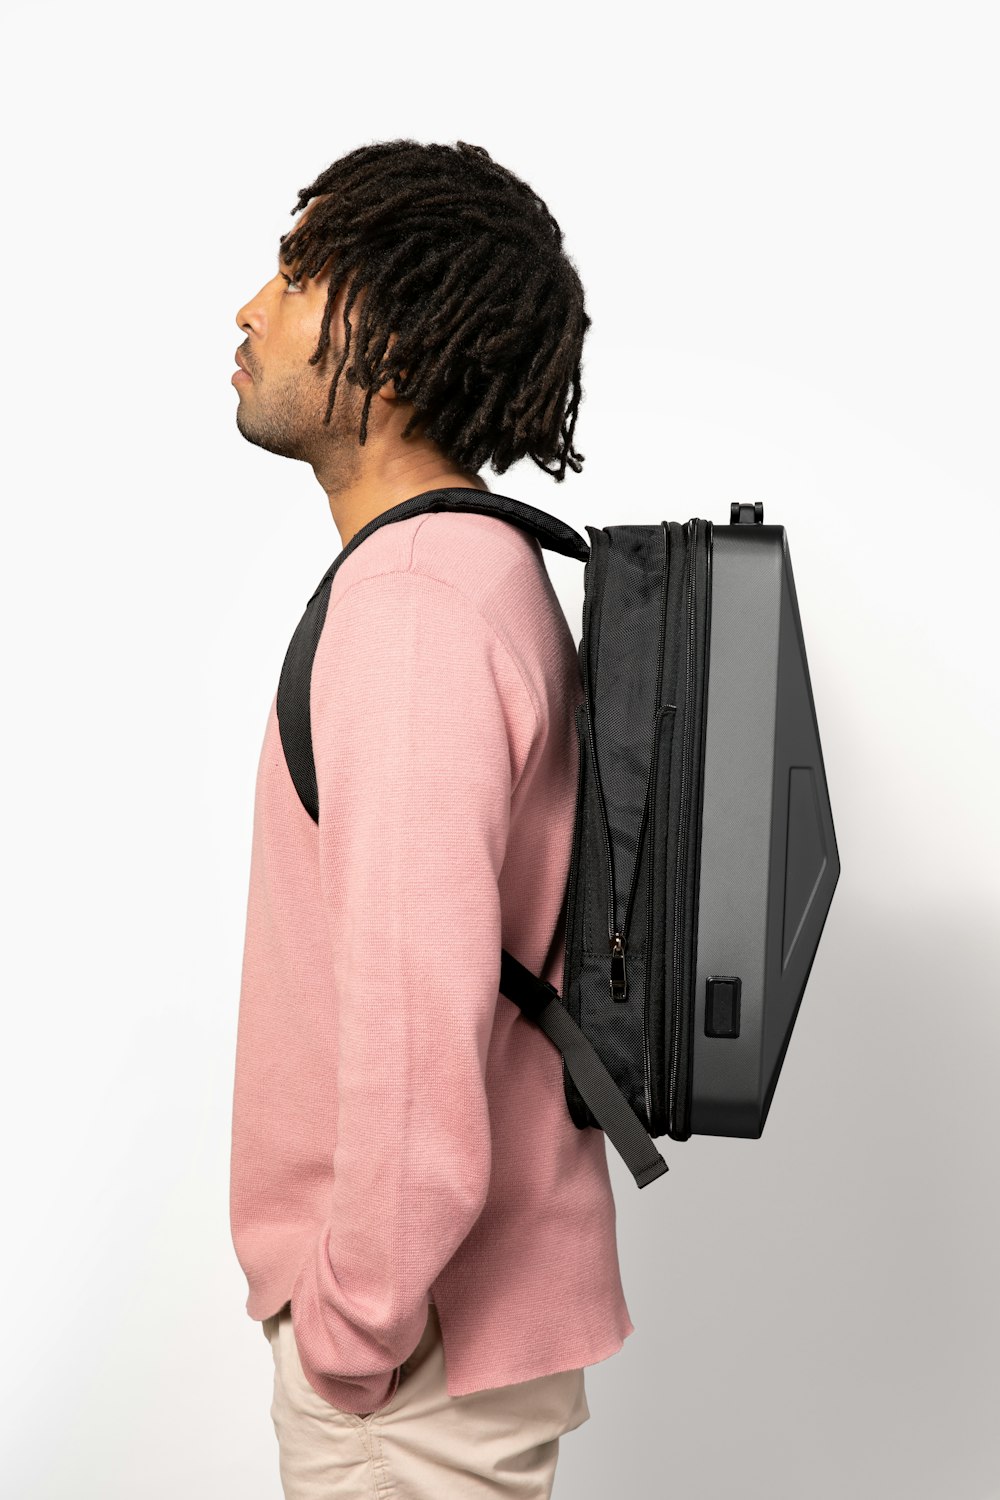 a man with dreadlocks wearing a backpack